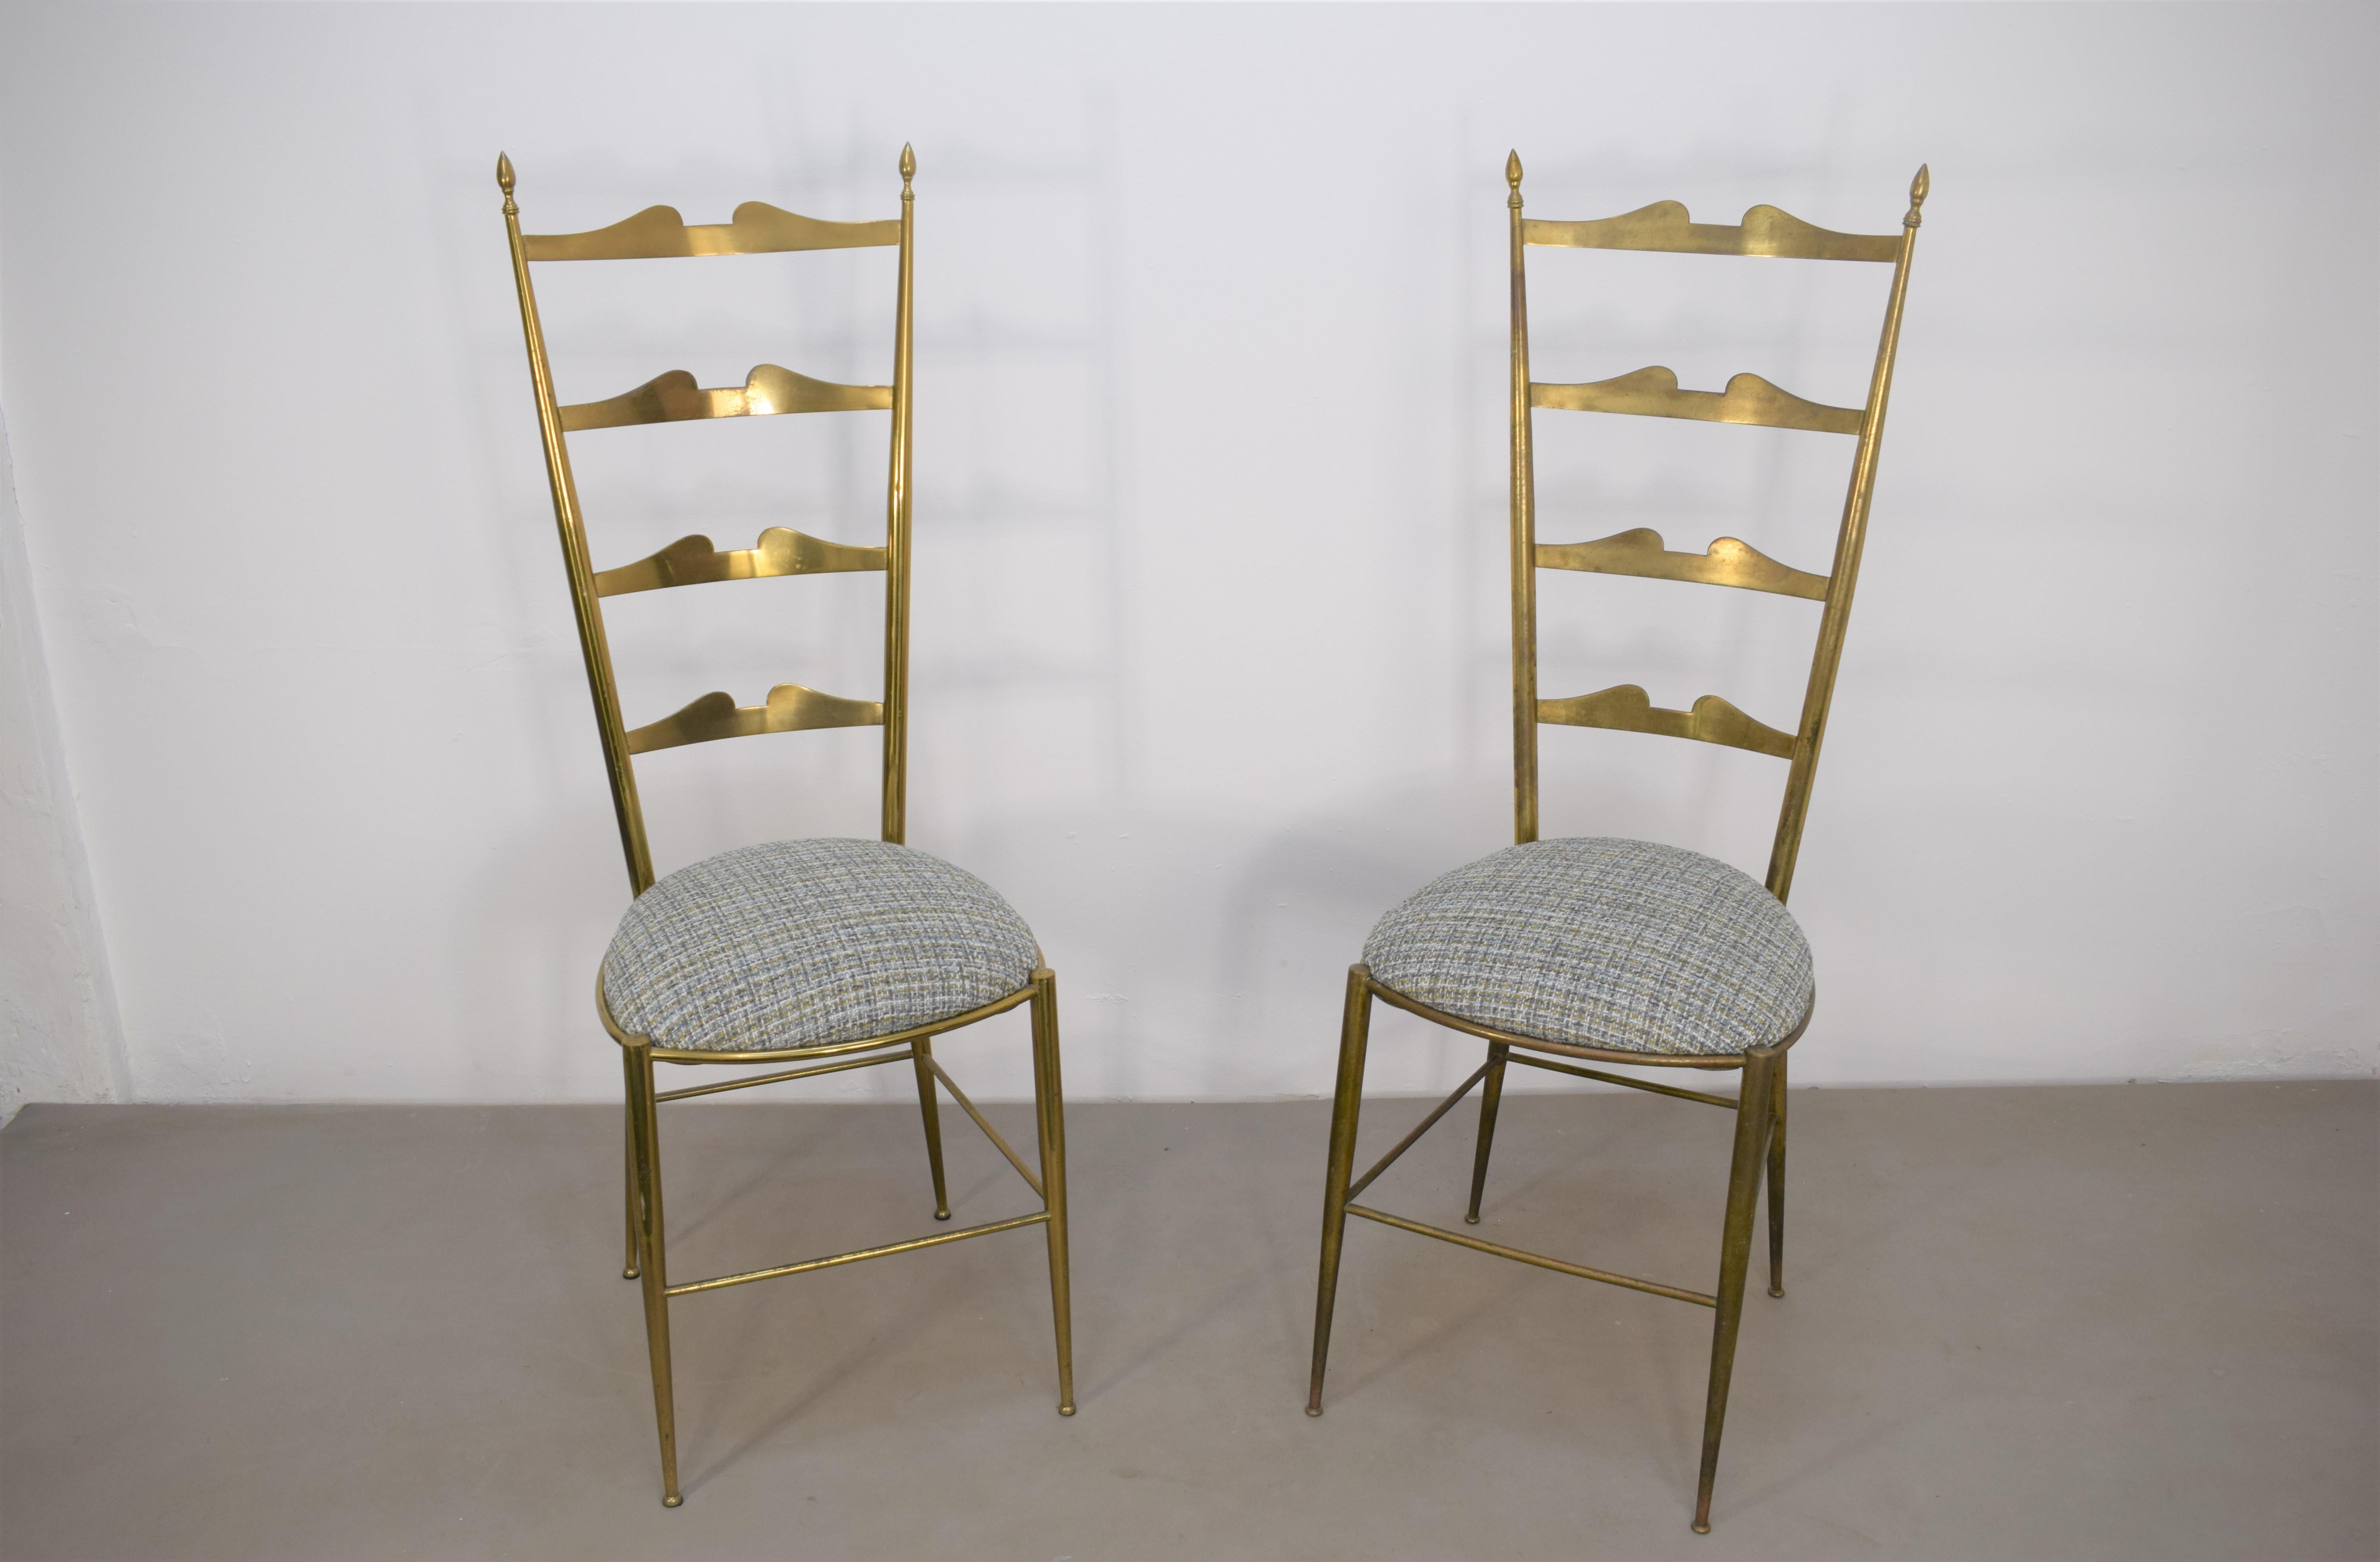 Pair of brass chairs, Italy, 1950s.
Dimensions: H=118 cm; W= 40 cm; D= 45 cm; H S= 50 cm.